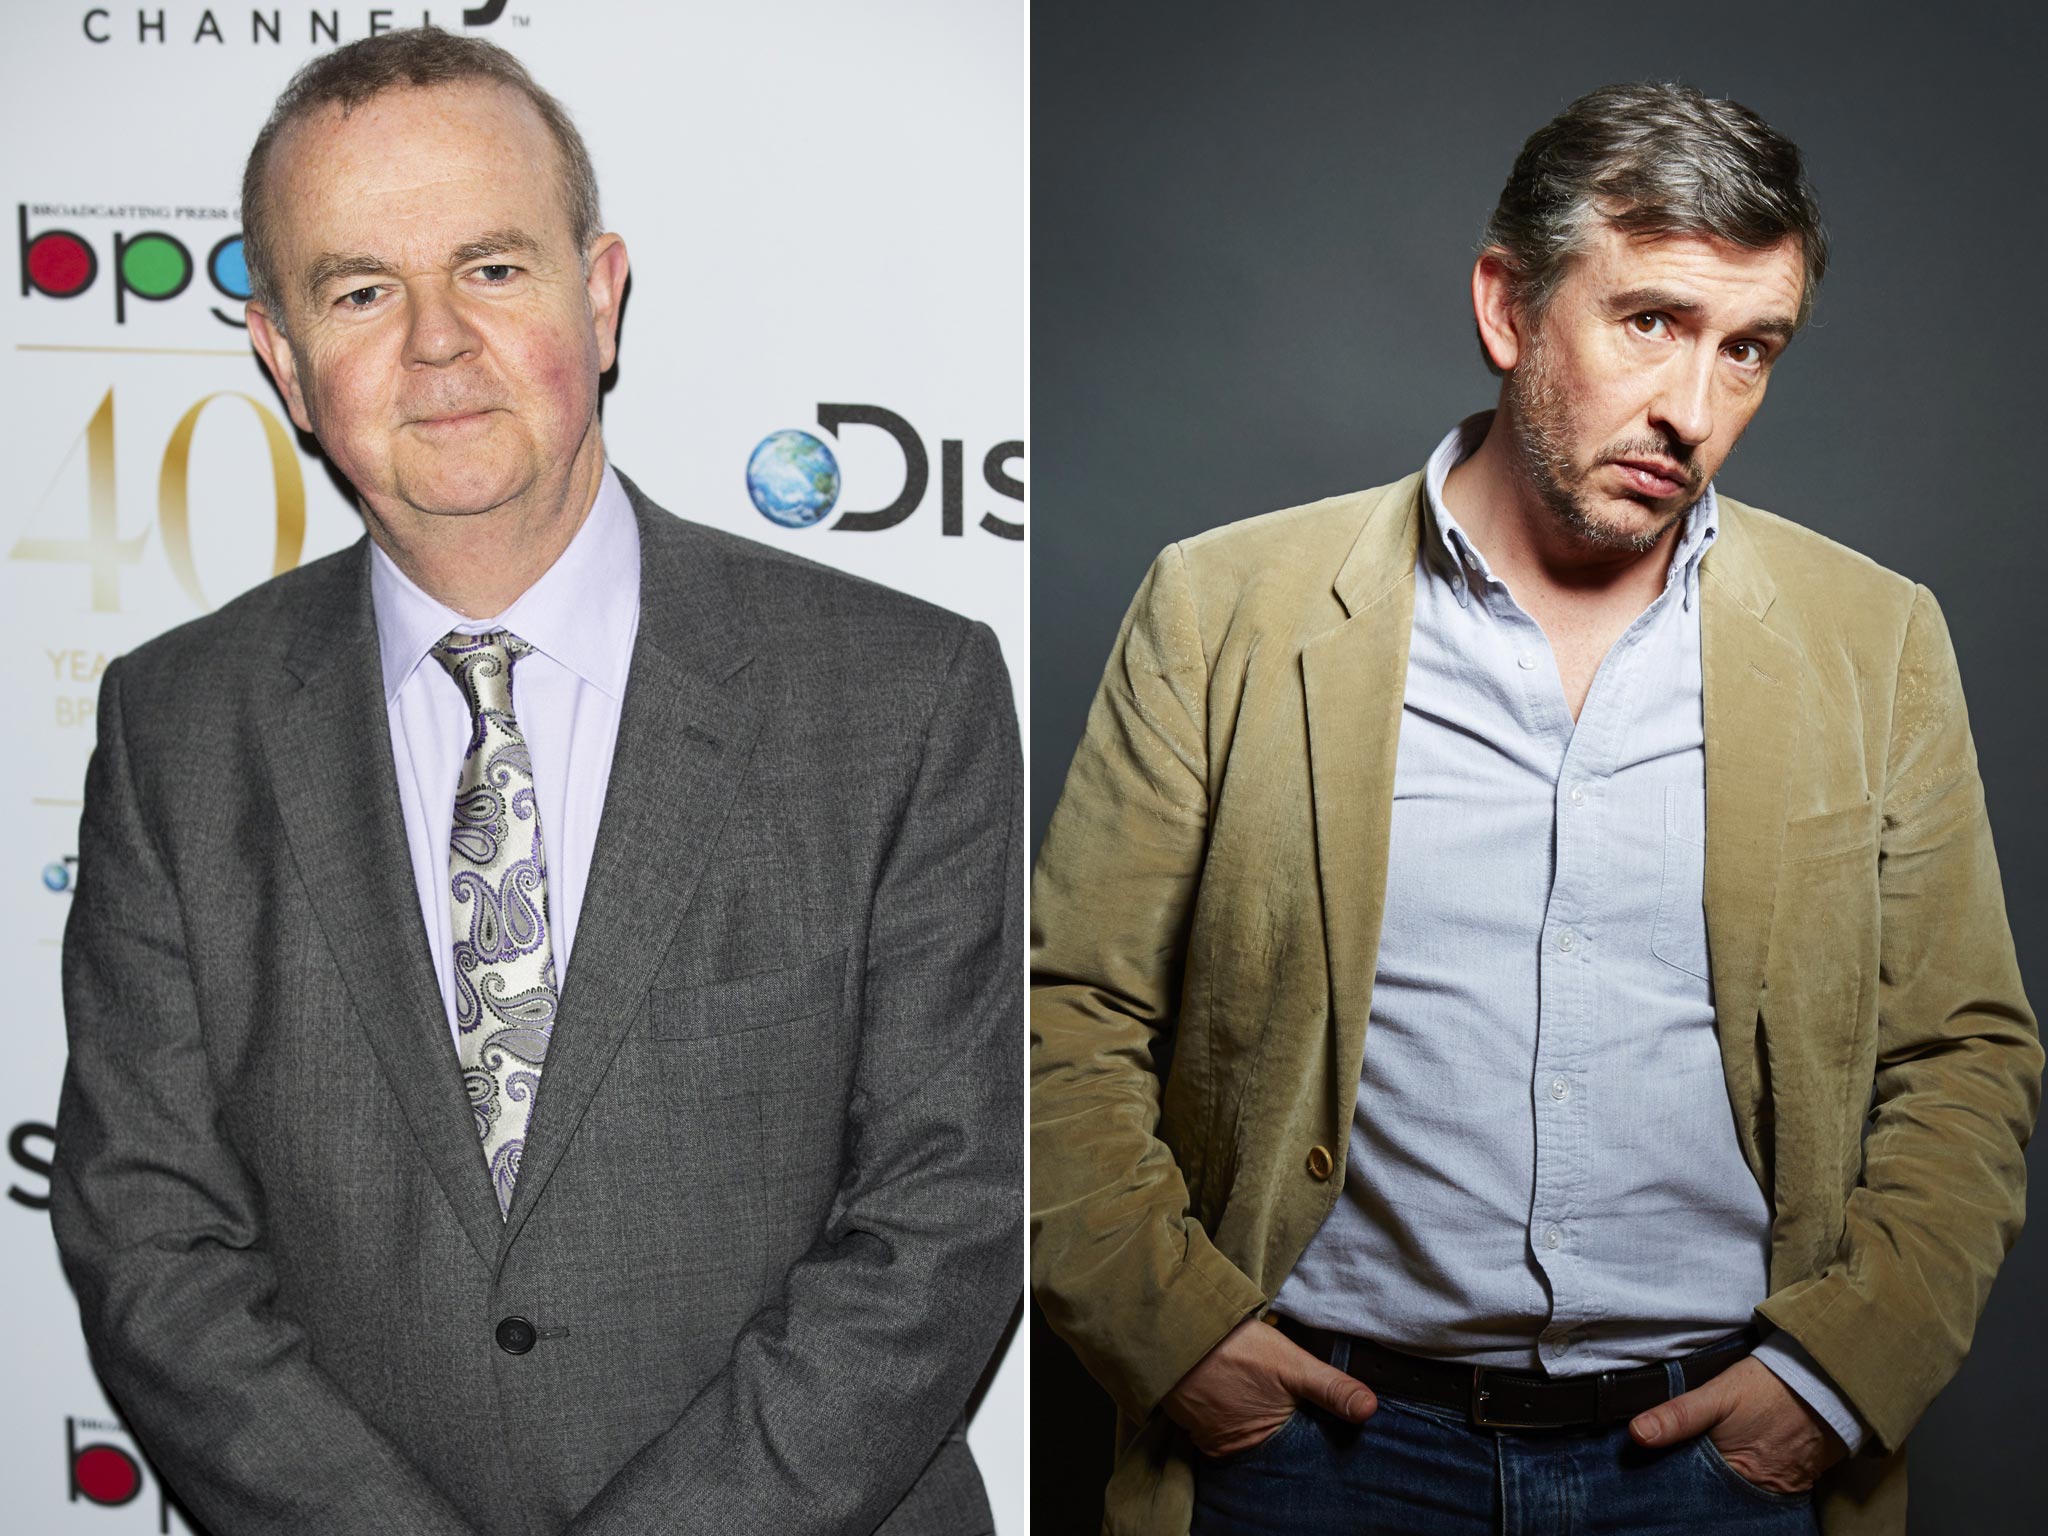 Hislop (left) did not comment but his deputy said Steve Coogan had no record of supporting free speech